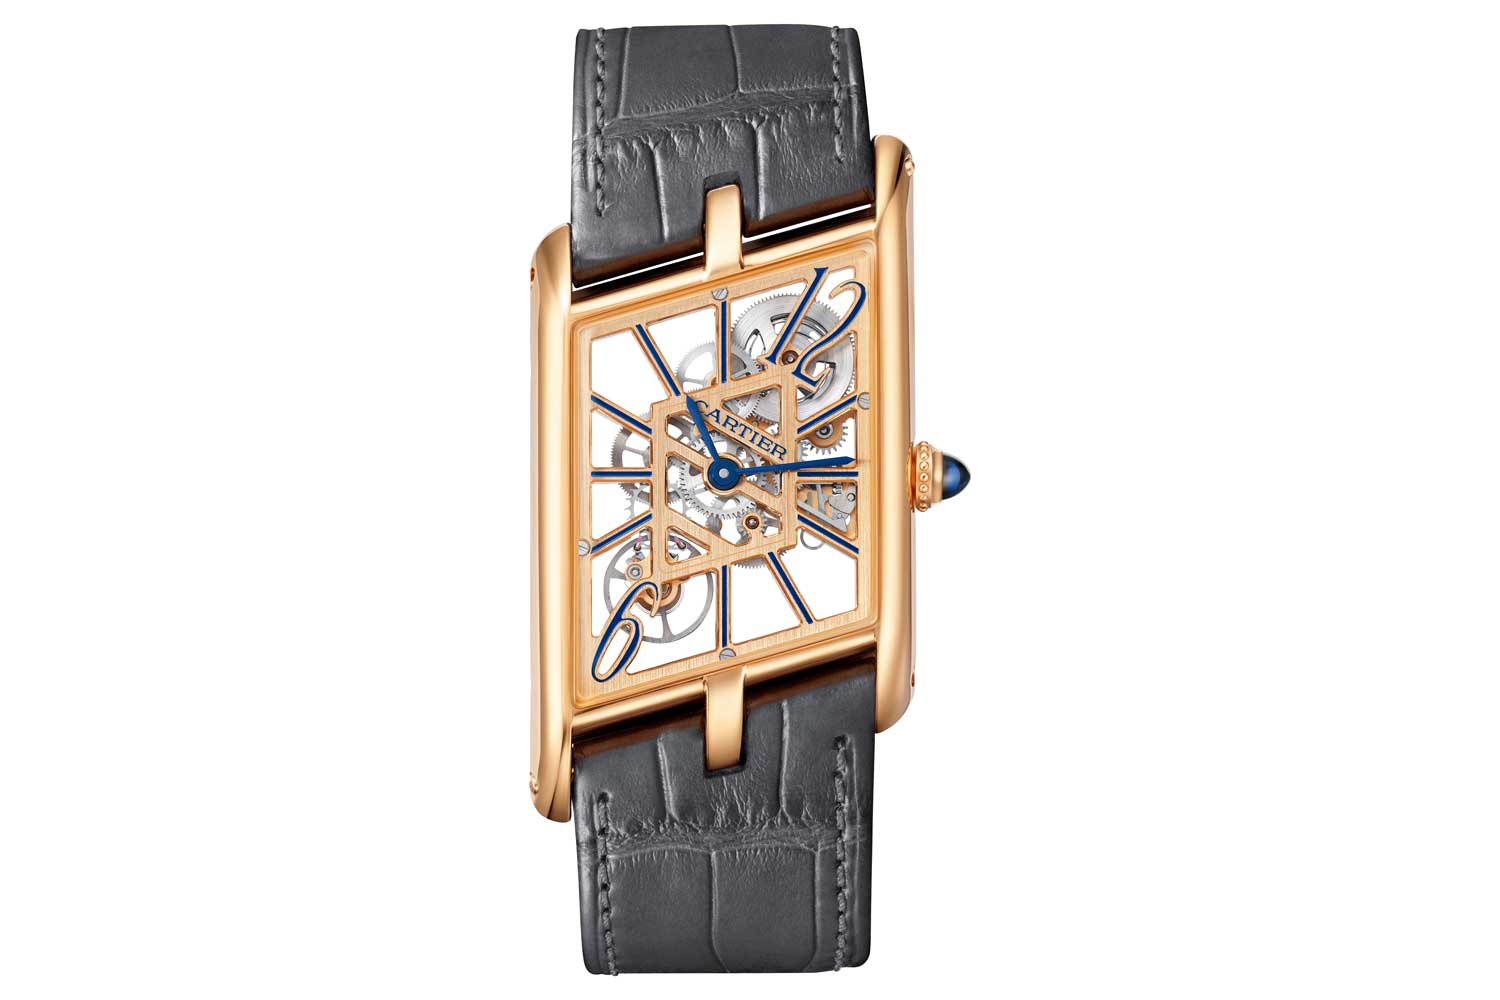 The 2020 Tank Asymétrique Skeleton, in pink gold (47.15 x 26.2 mm), limited to 100 pieces